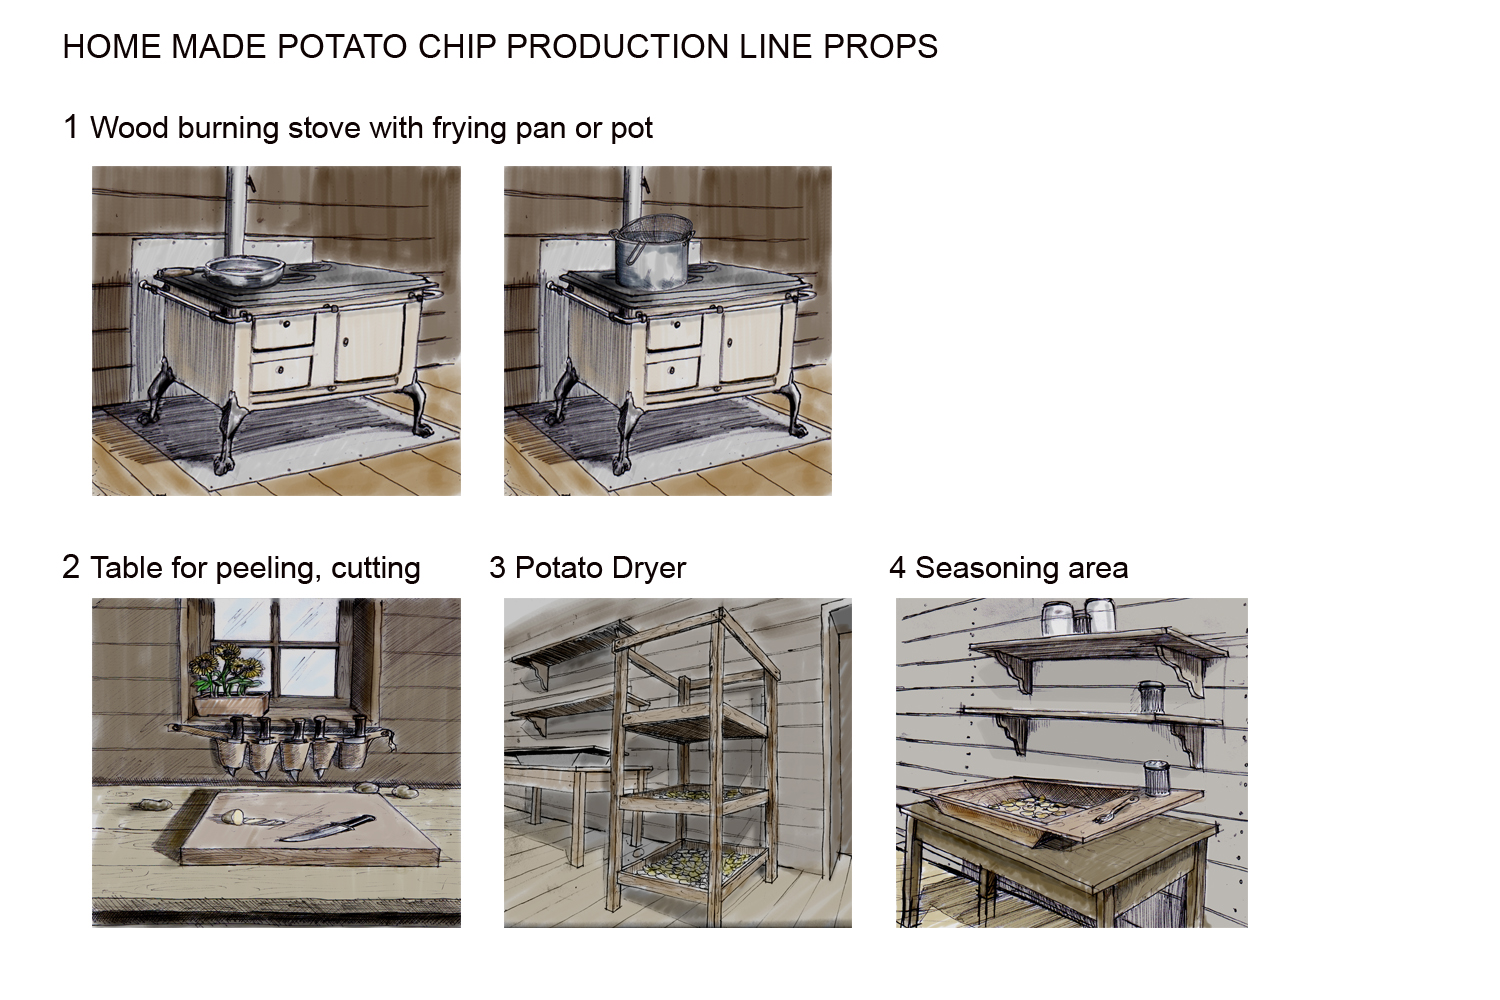 5 concept machinery for potato production.jpg